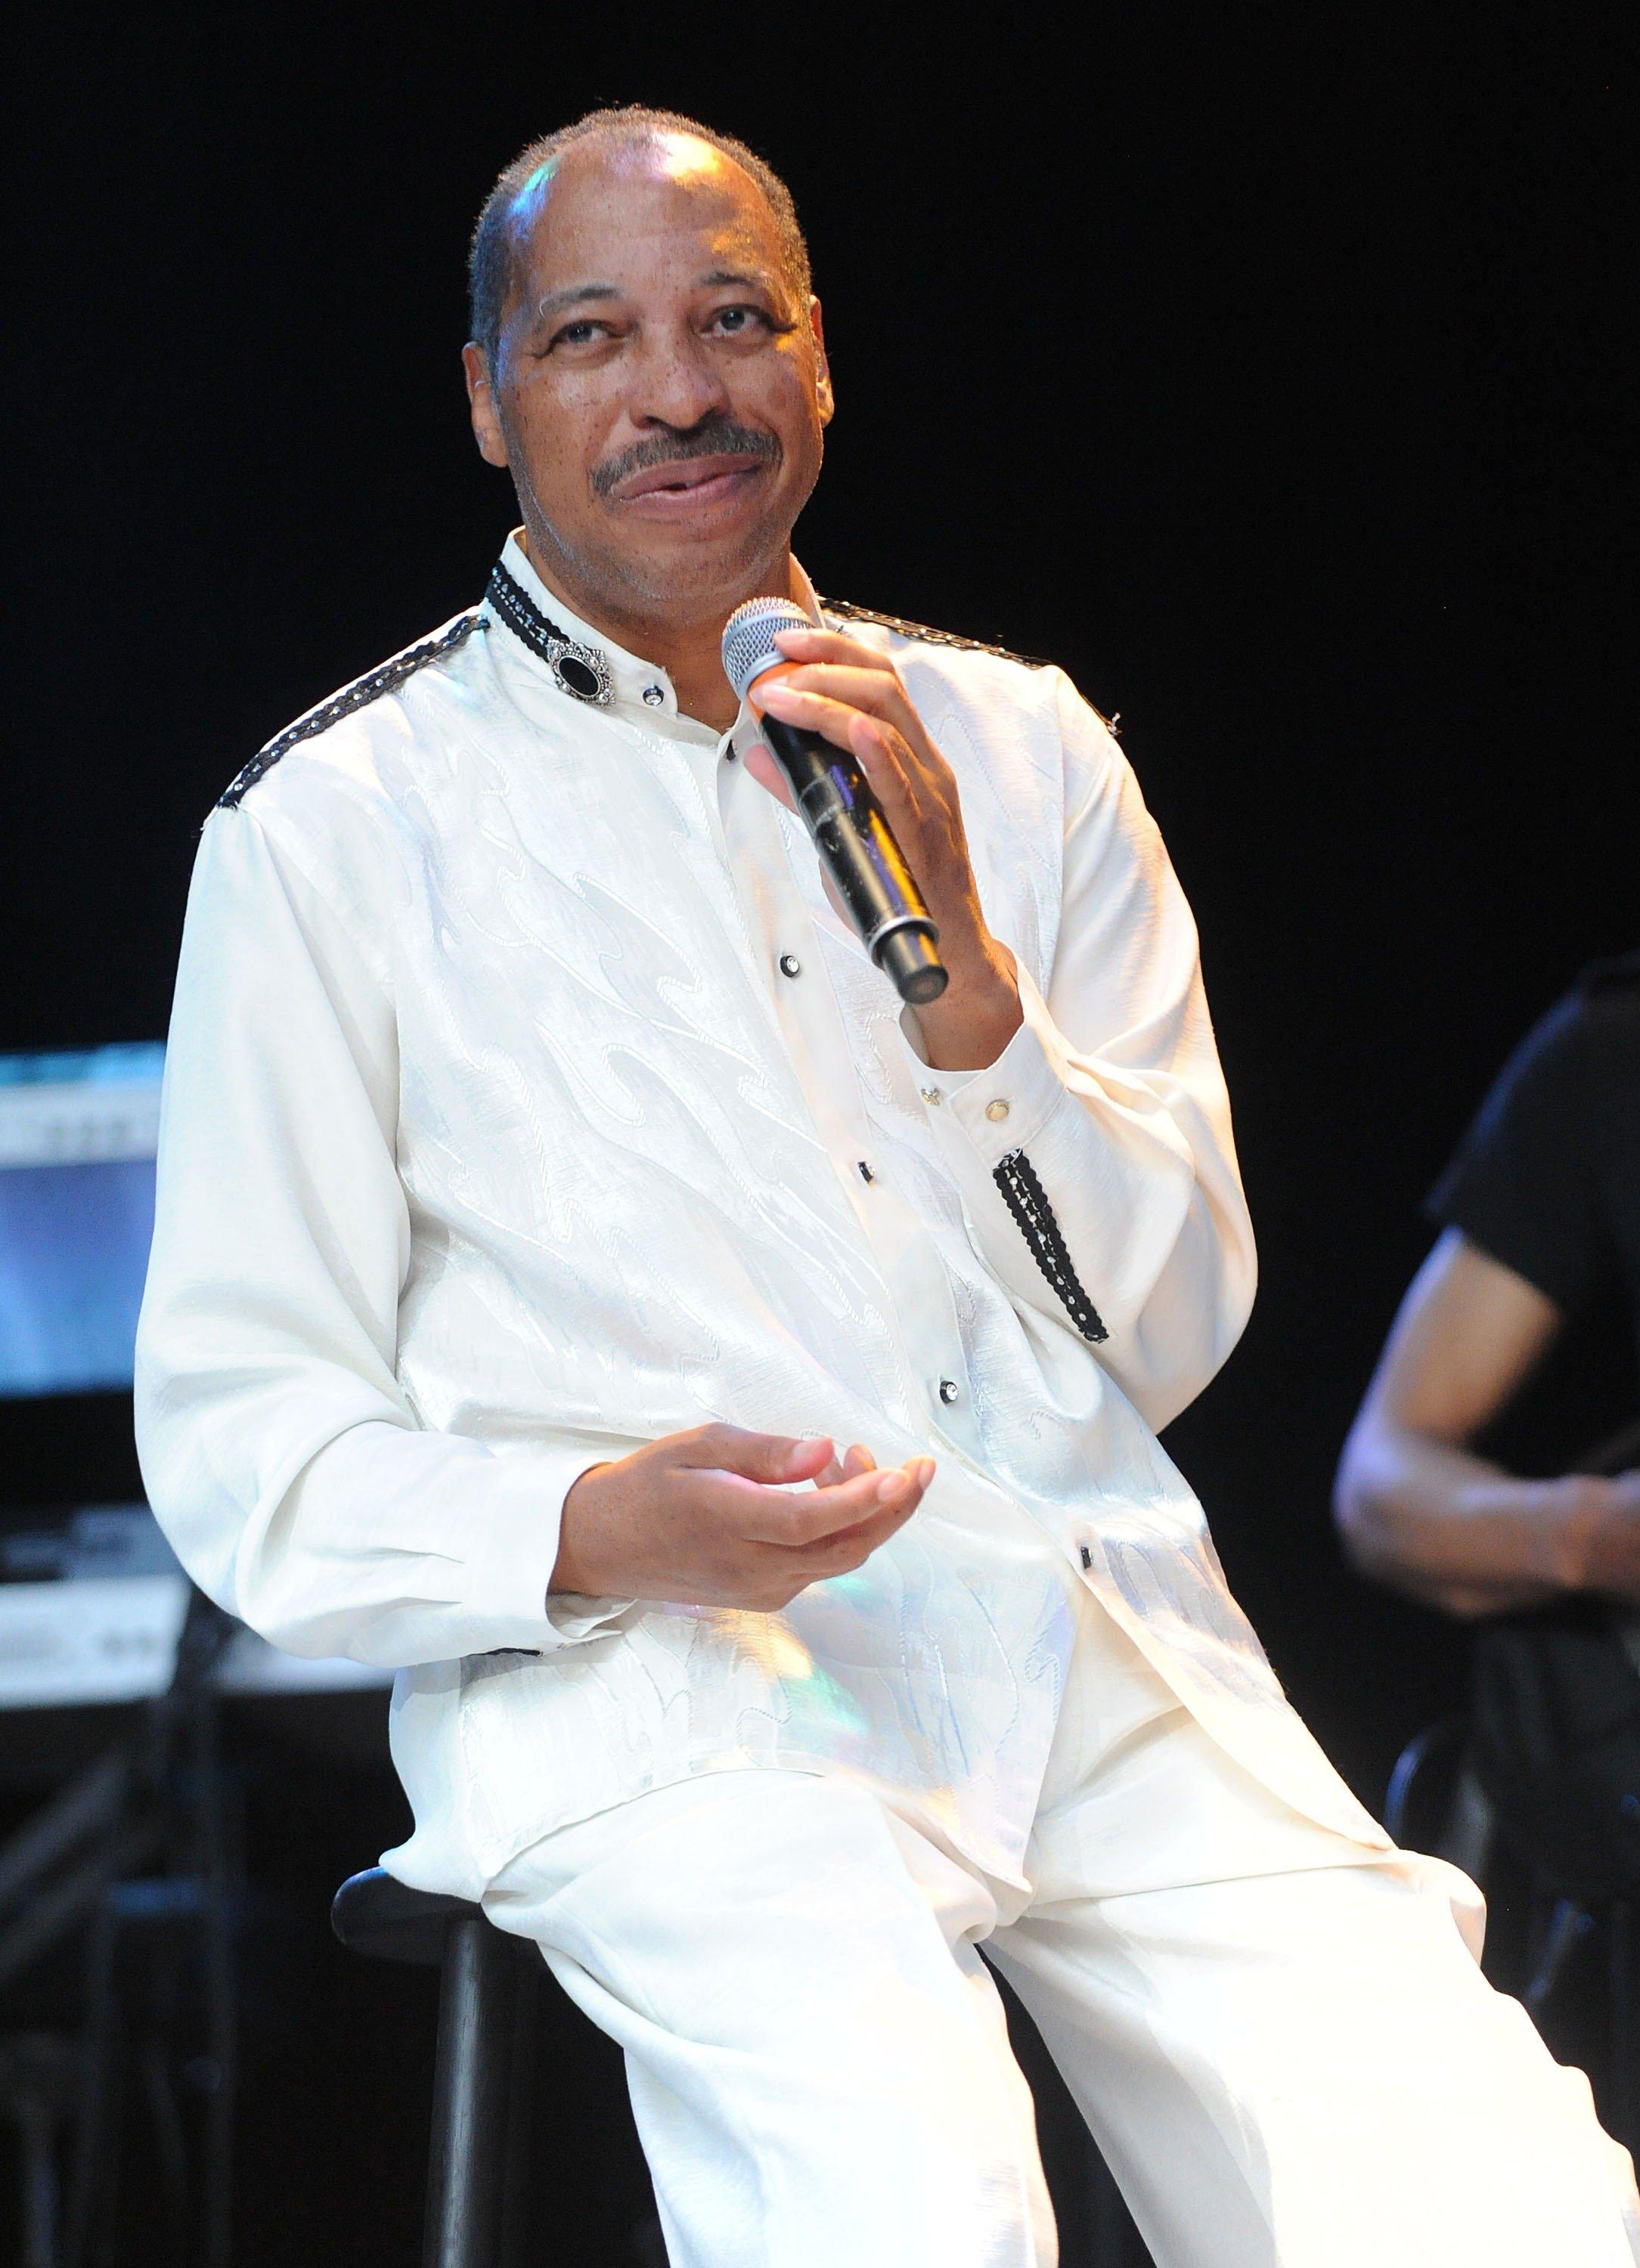 Keith Wilder photographed in 2013